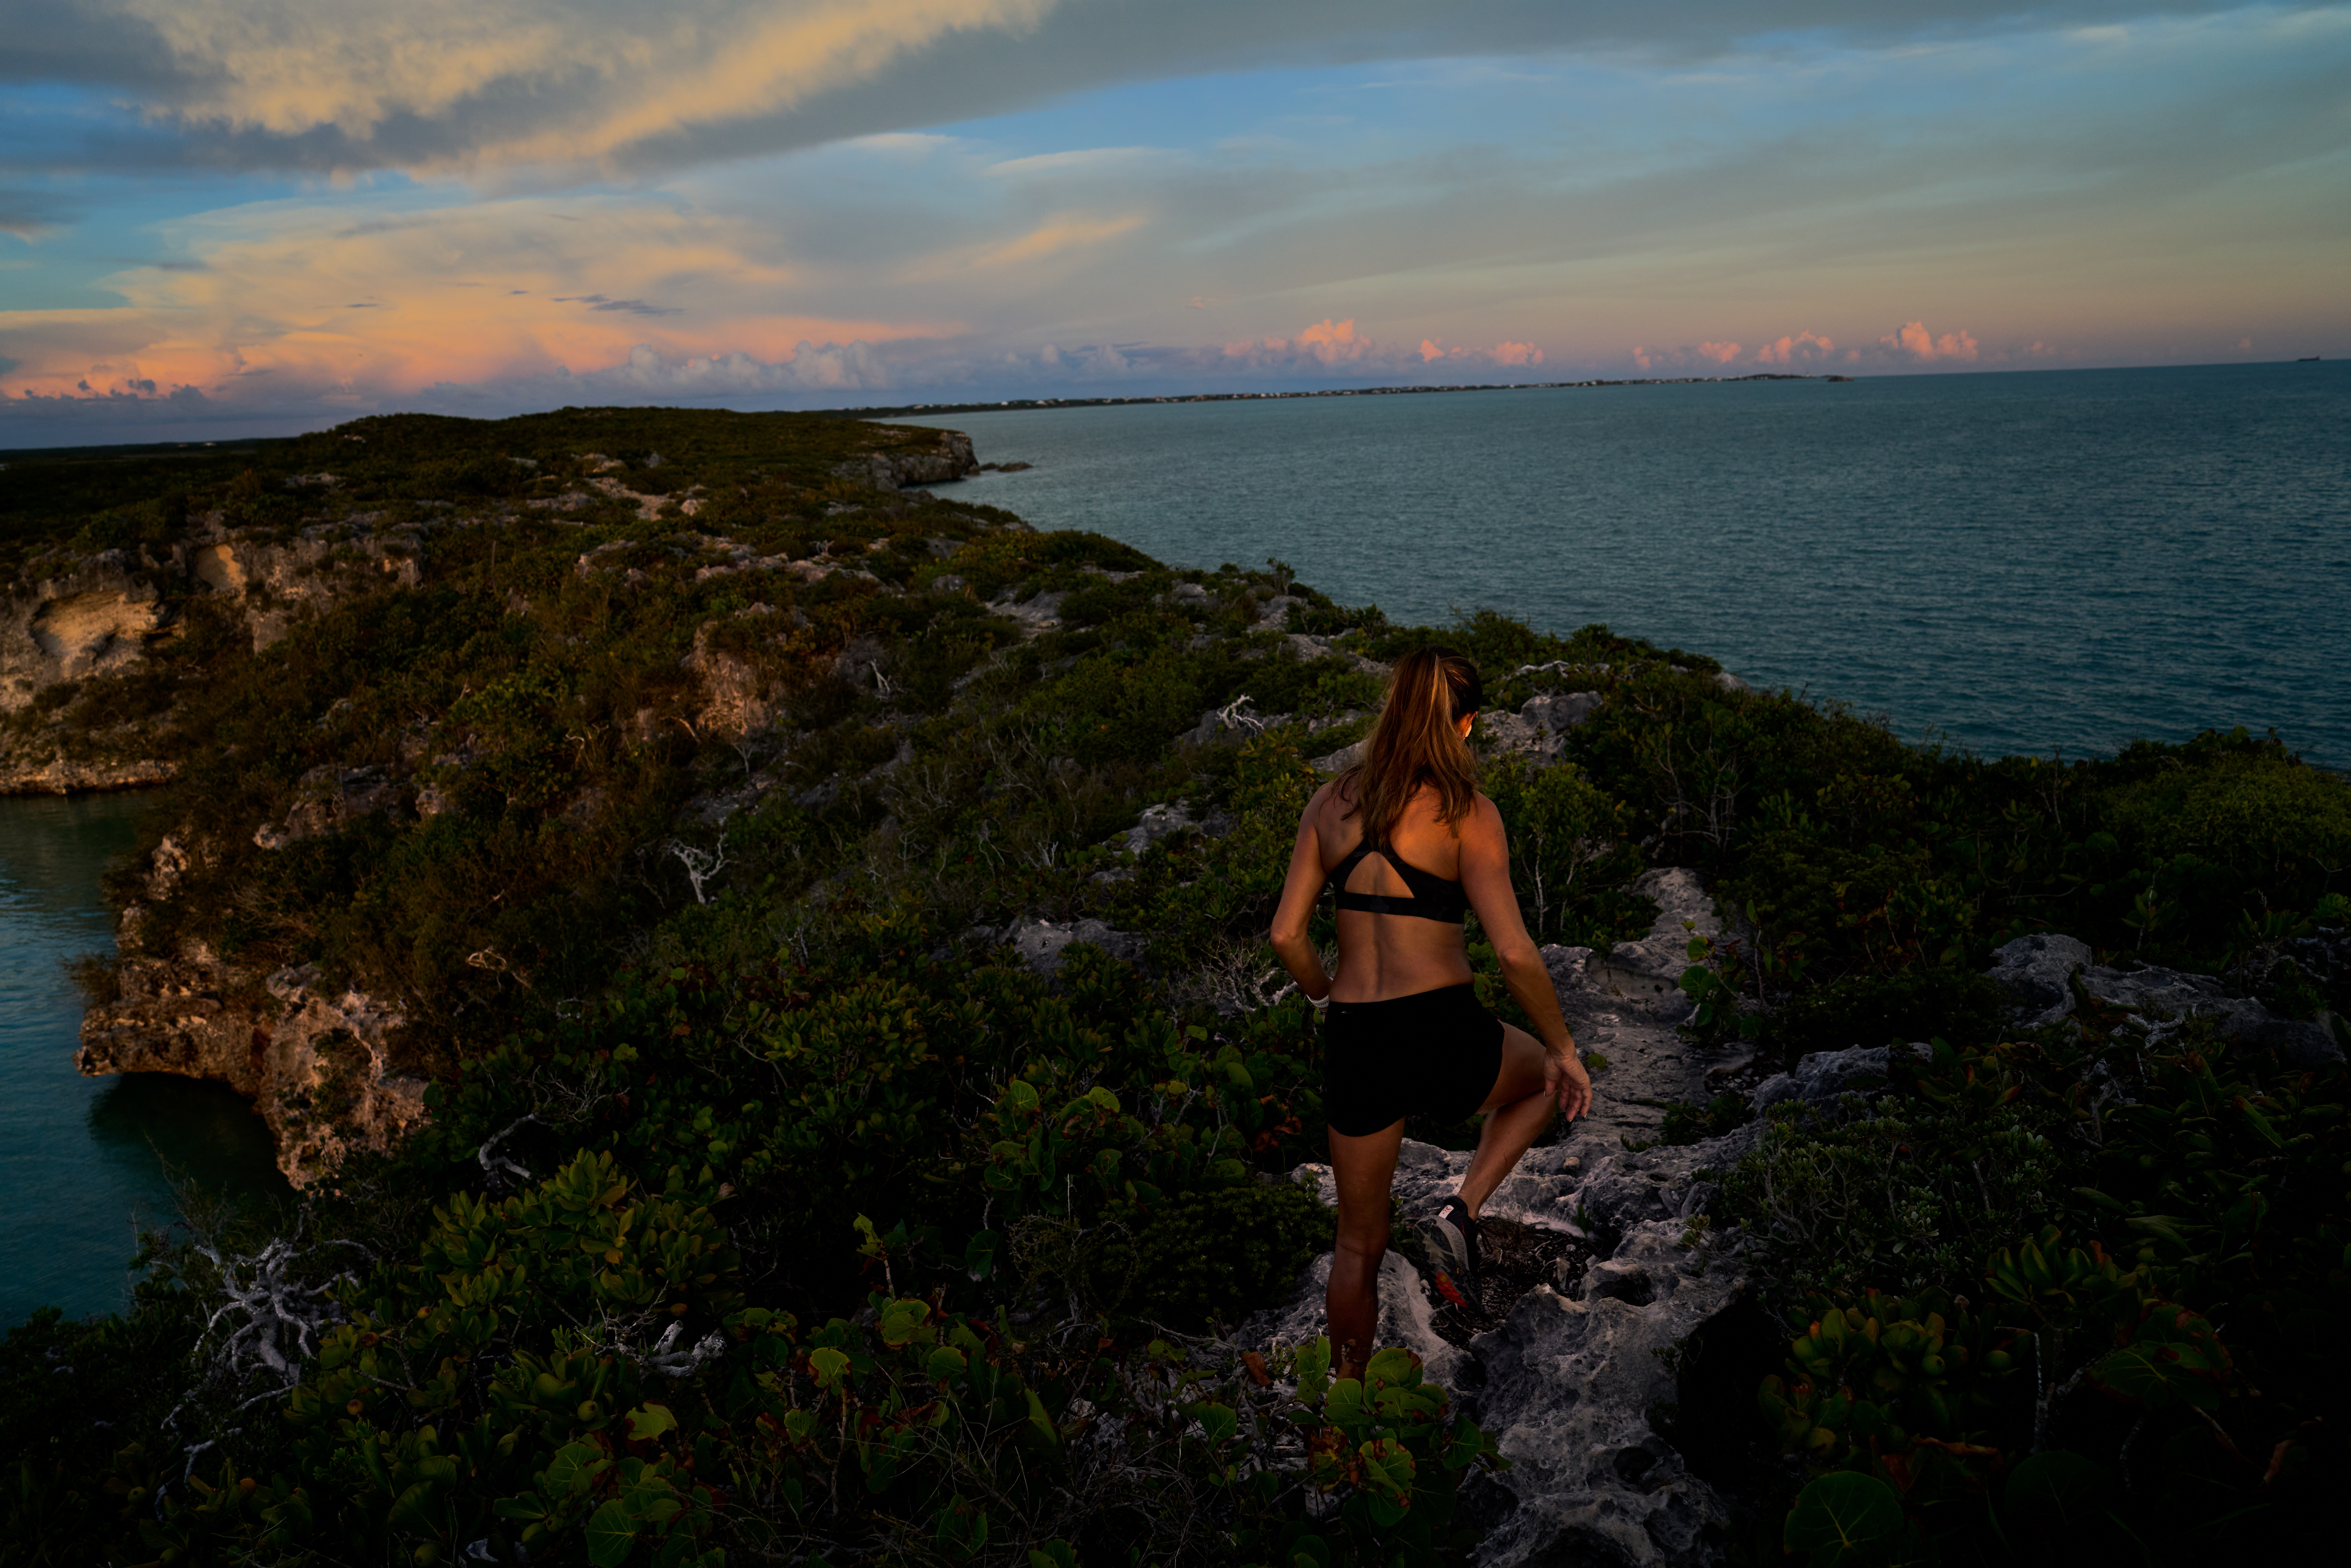 Fitness photography in Turks and Caicos includes paths along rocky outcroppings.